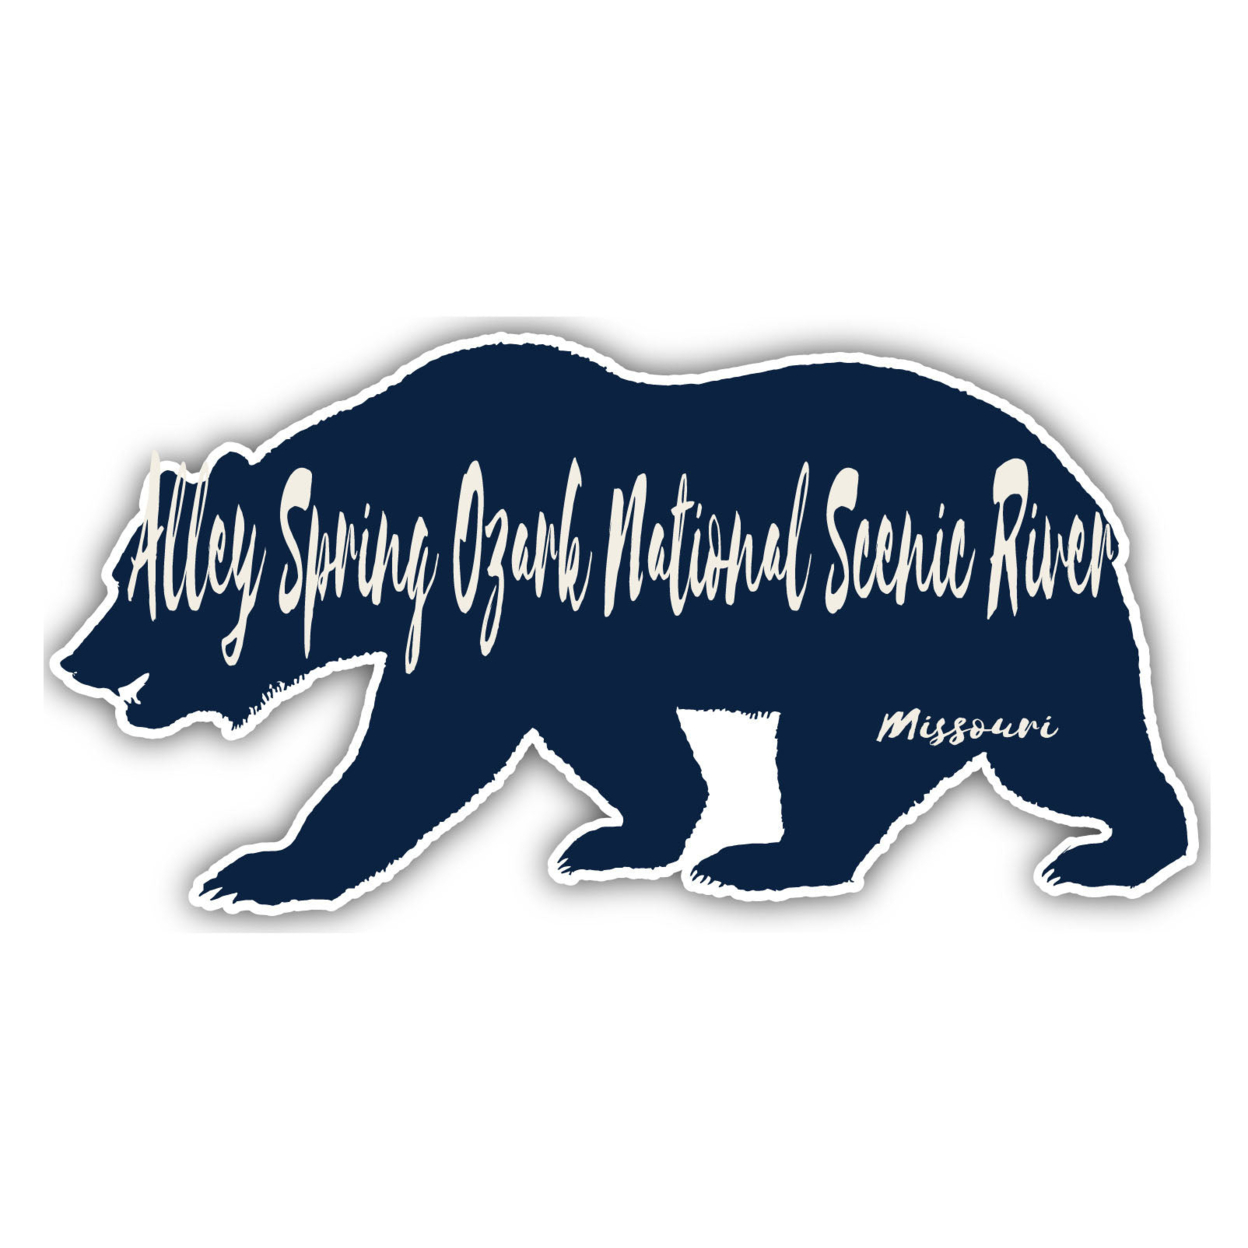 Alley Spring Ozark National Scenic River Missouri Souvenir Decorative Stickers (Choose Theme And Size) - 4-Pack, 12-Inch, Bear